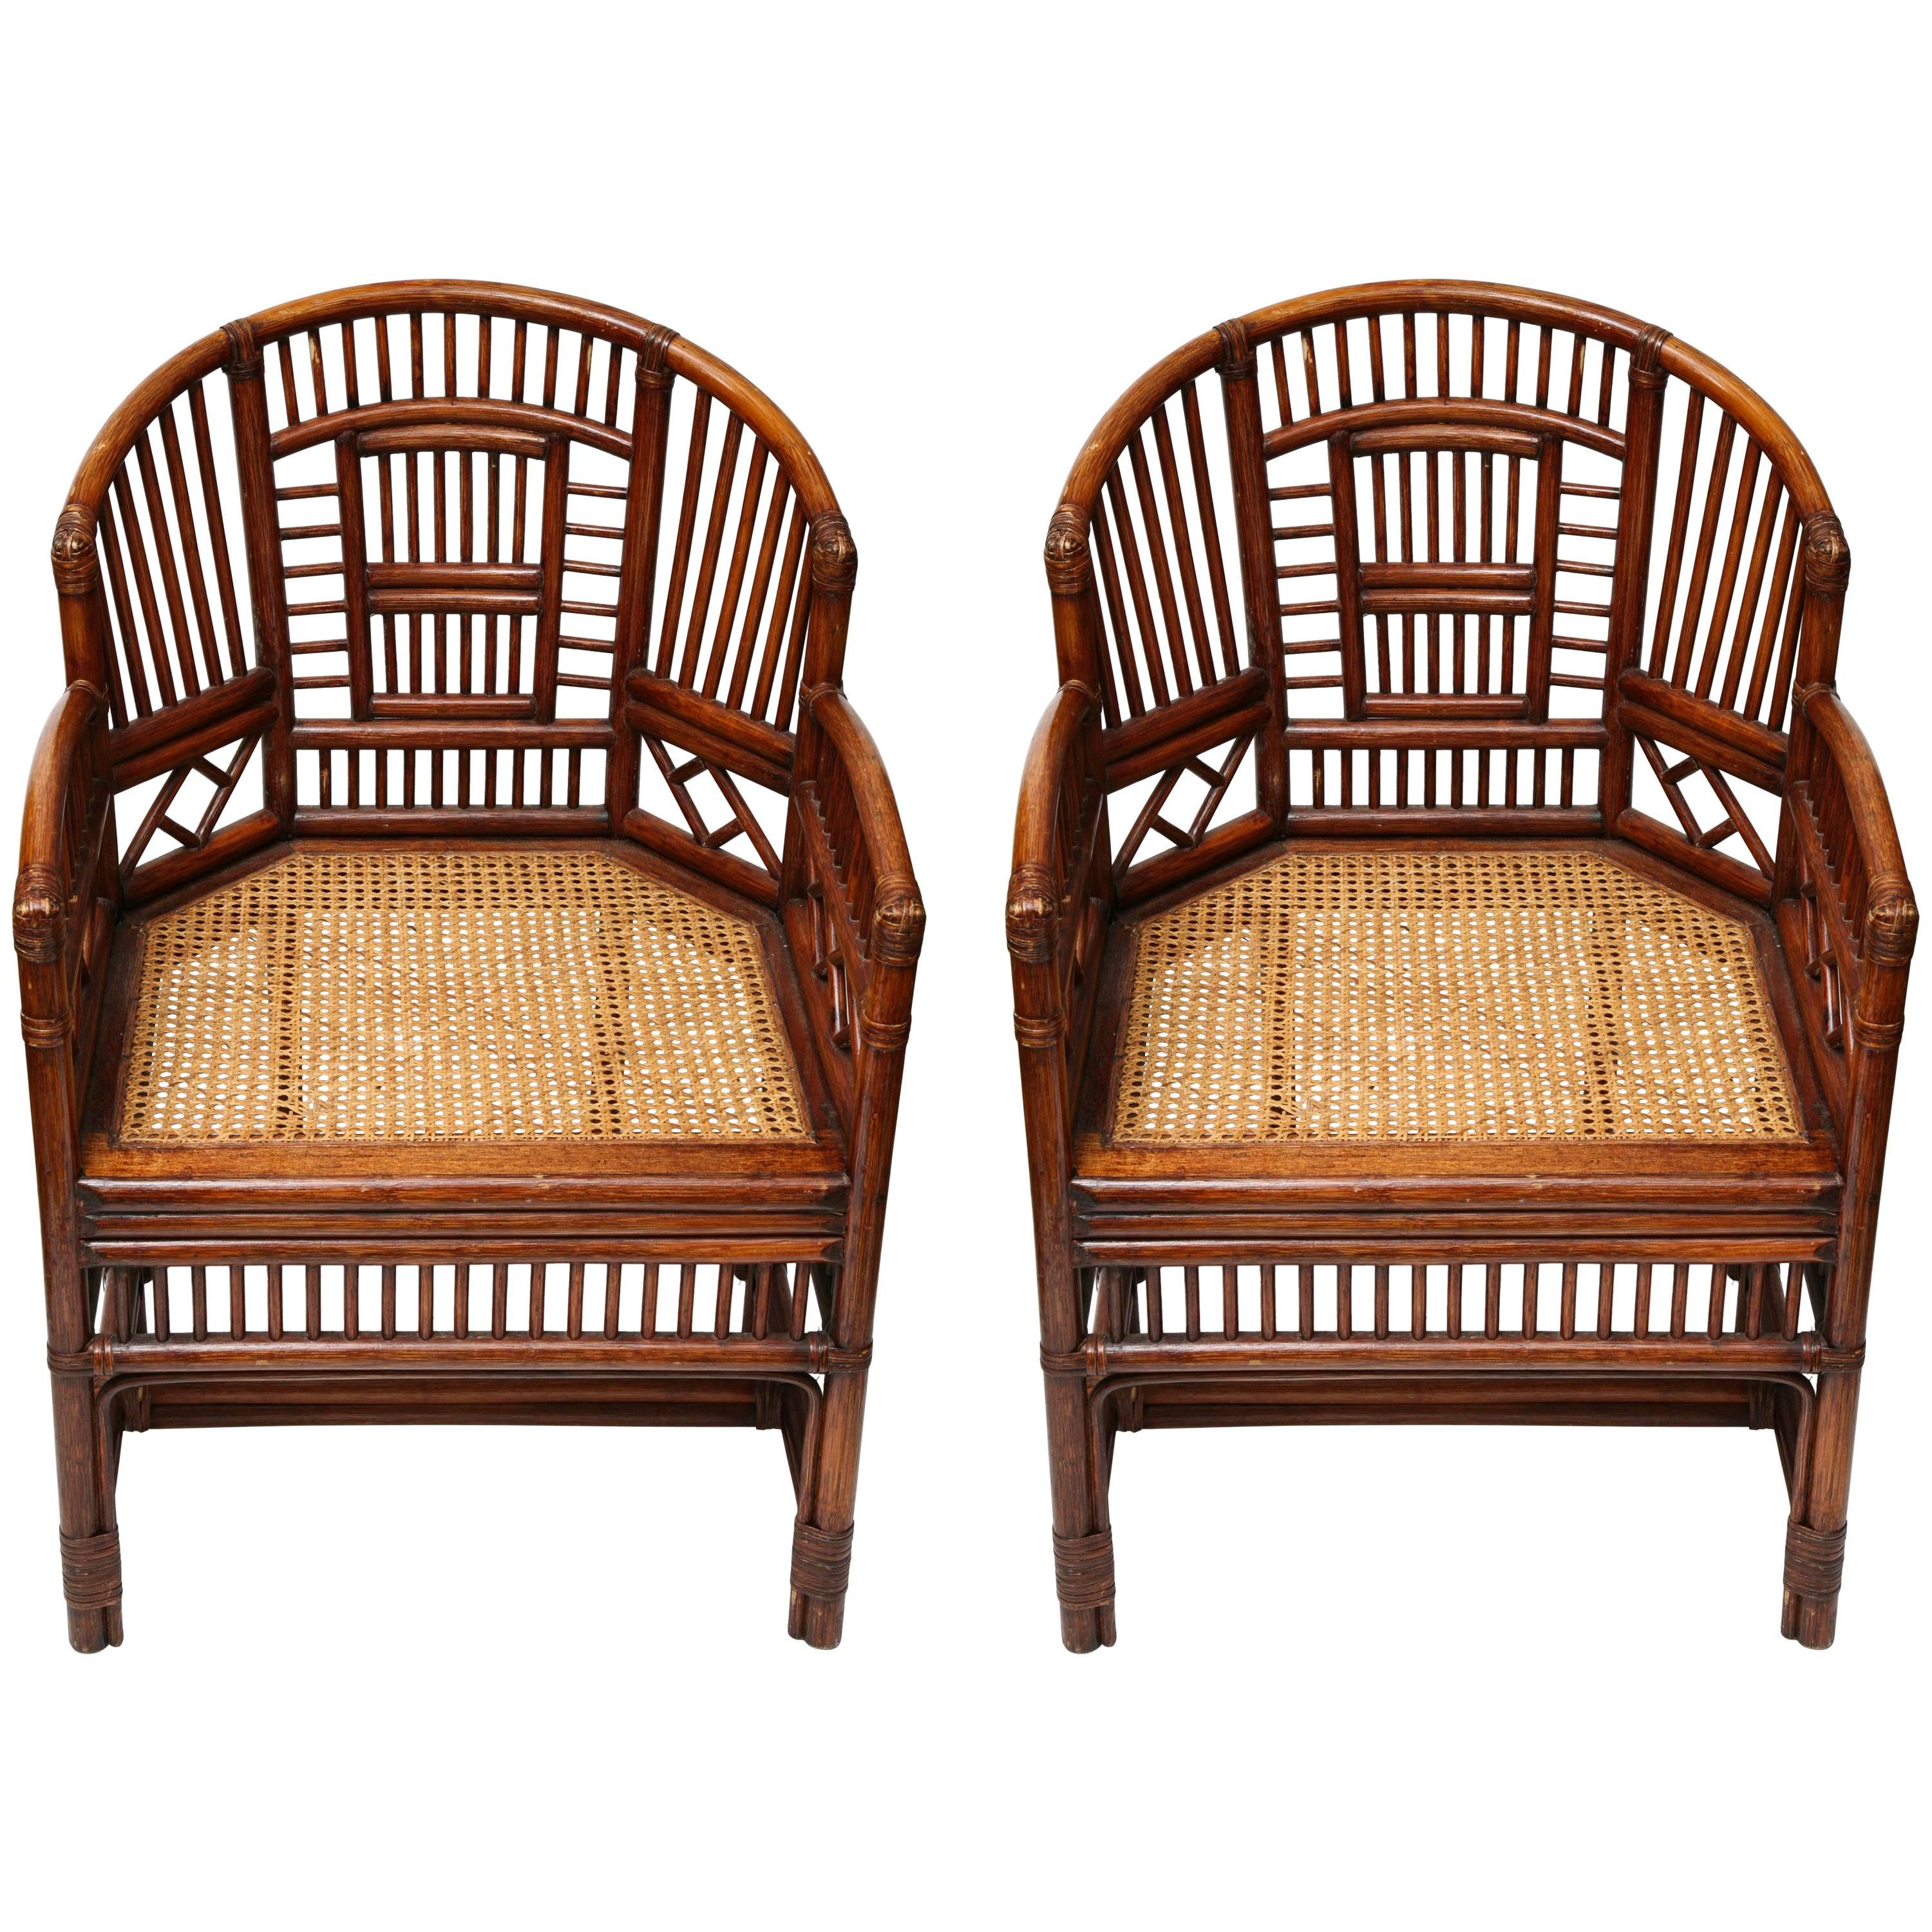 Pair of English Chippendale Style Chairs with Caned Seat